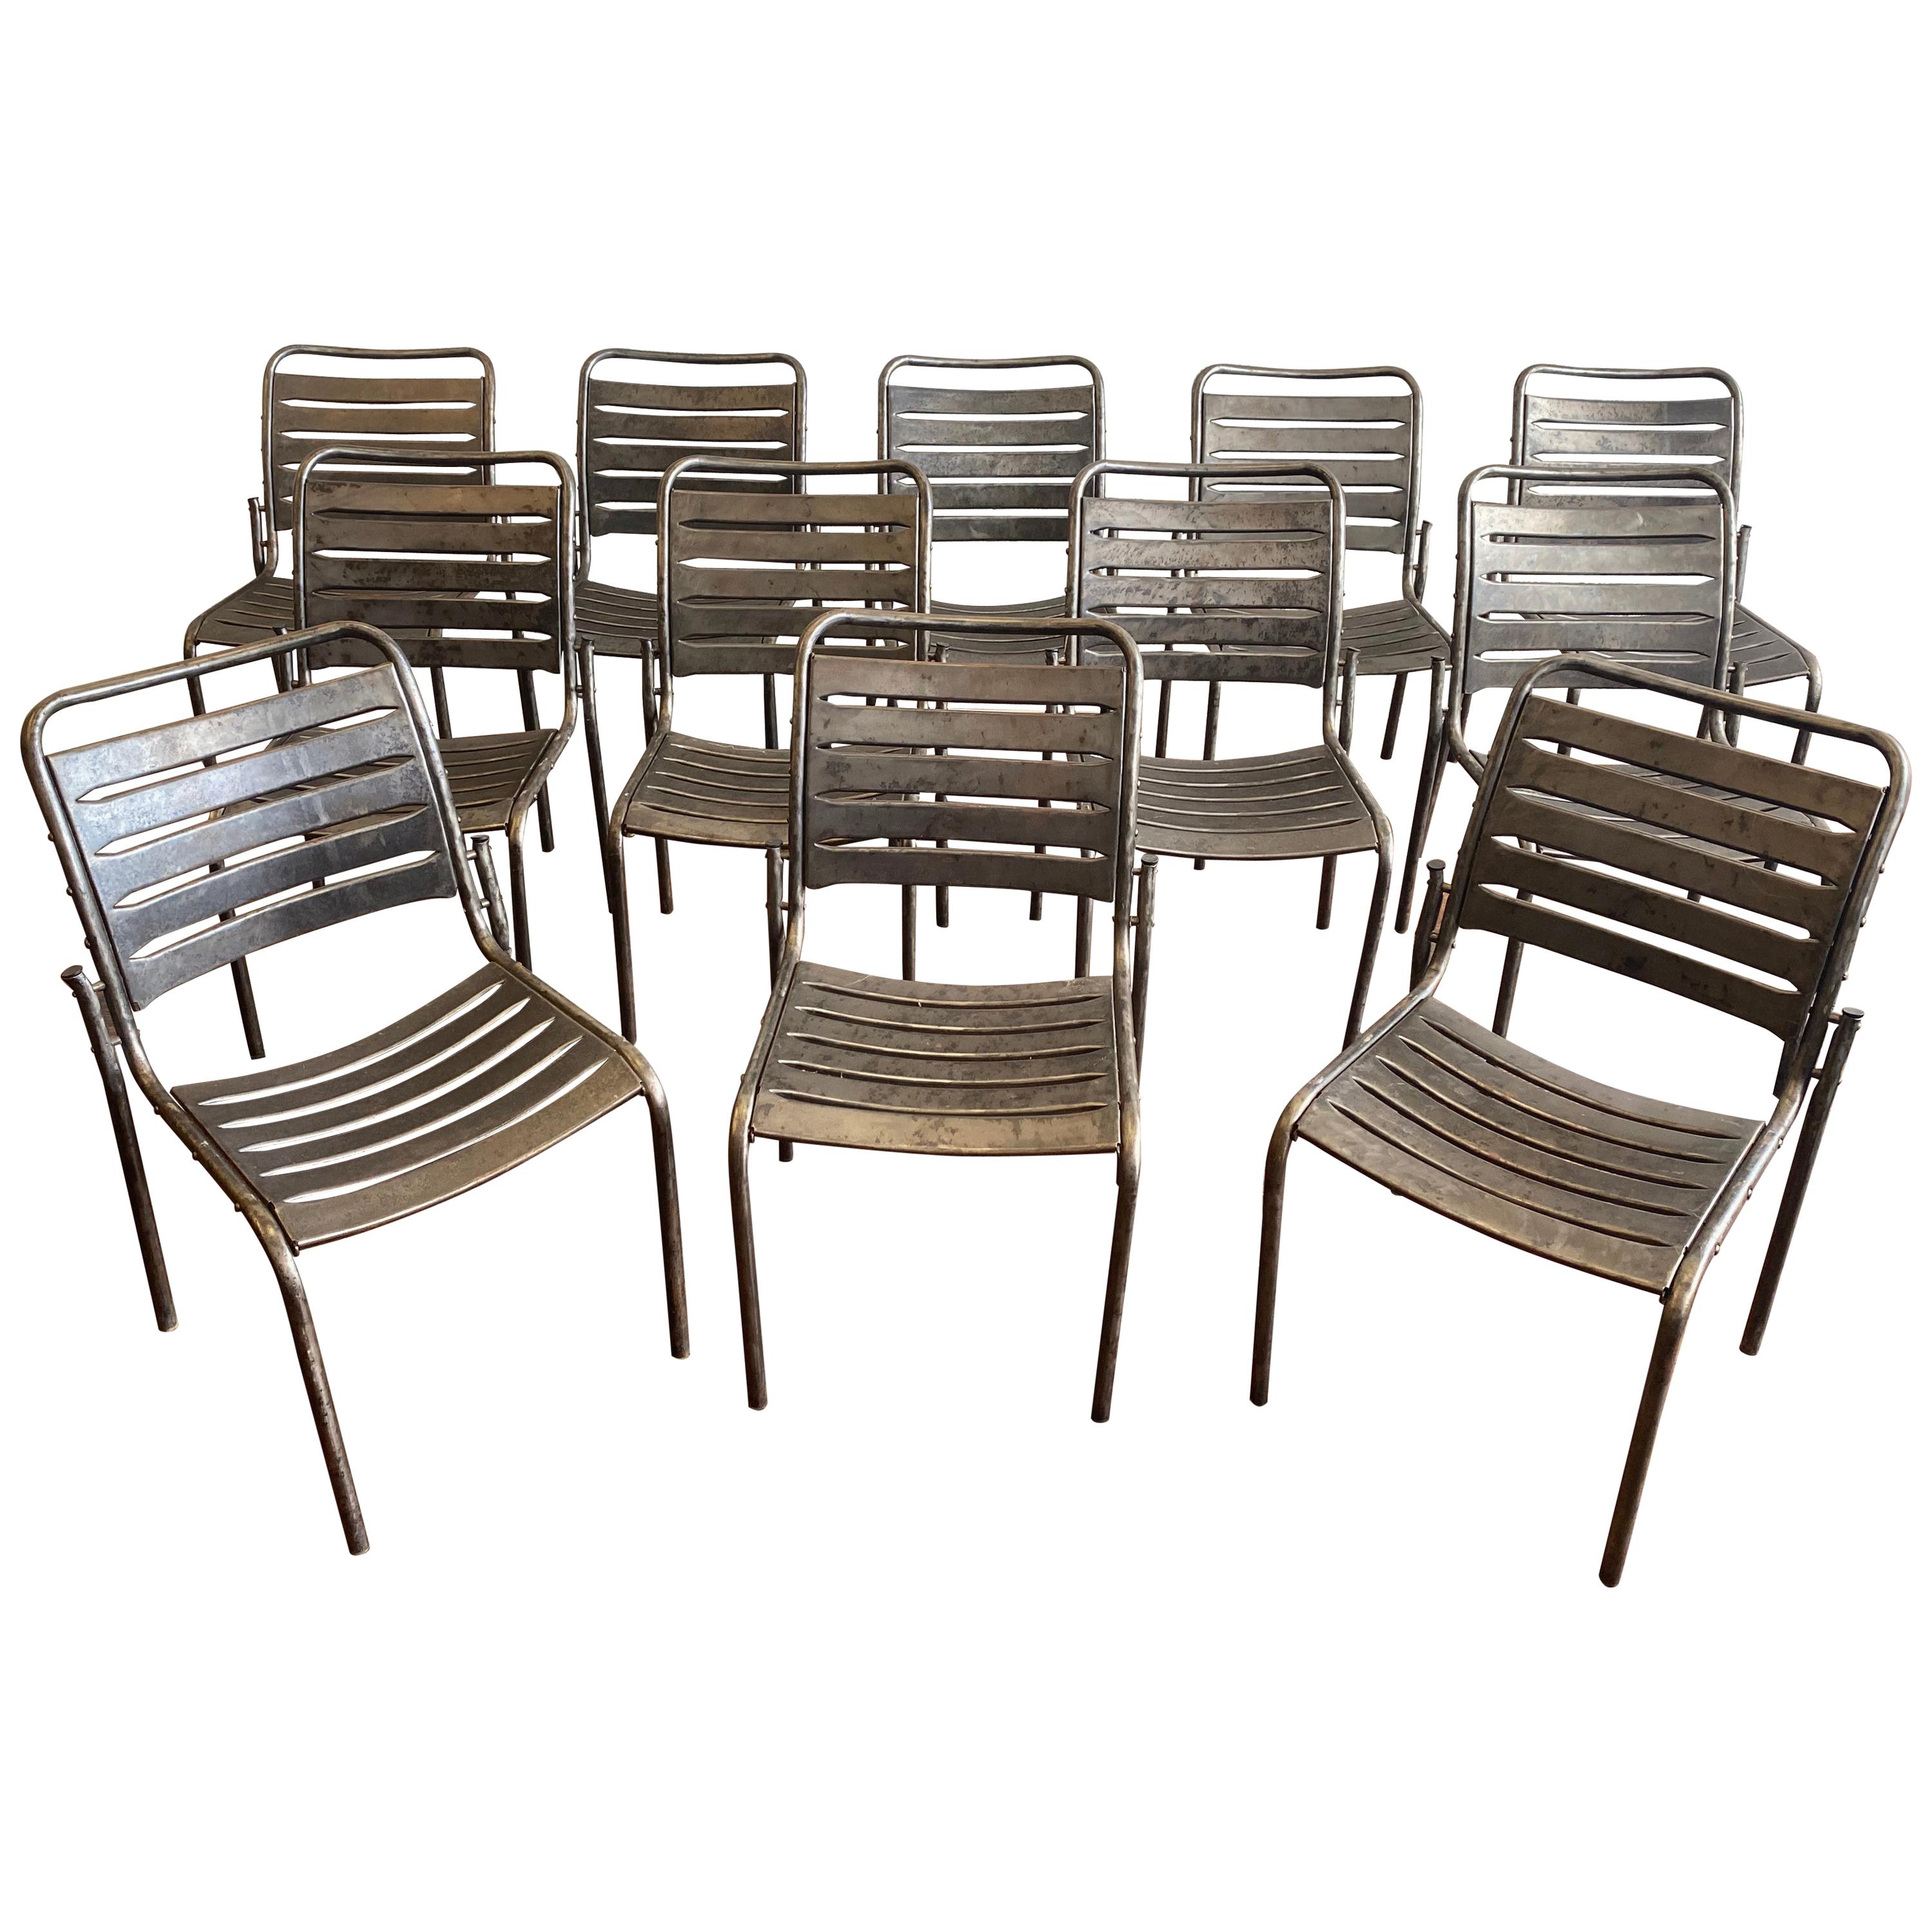 Set of 12 Modern Metal Chairs For Sale